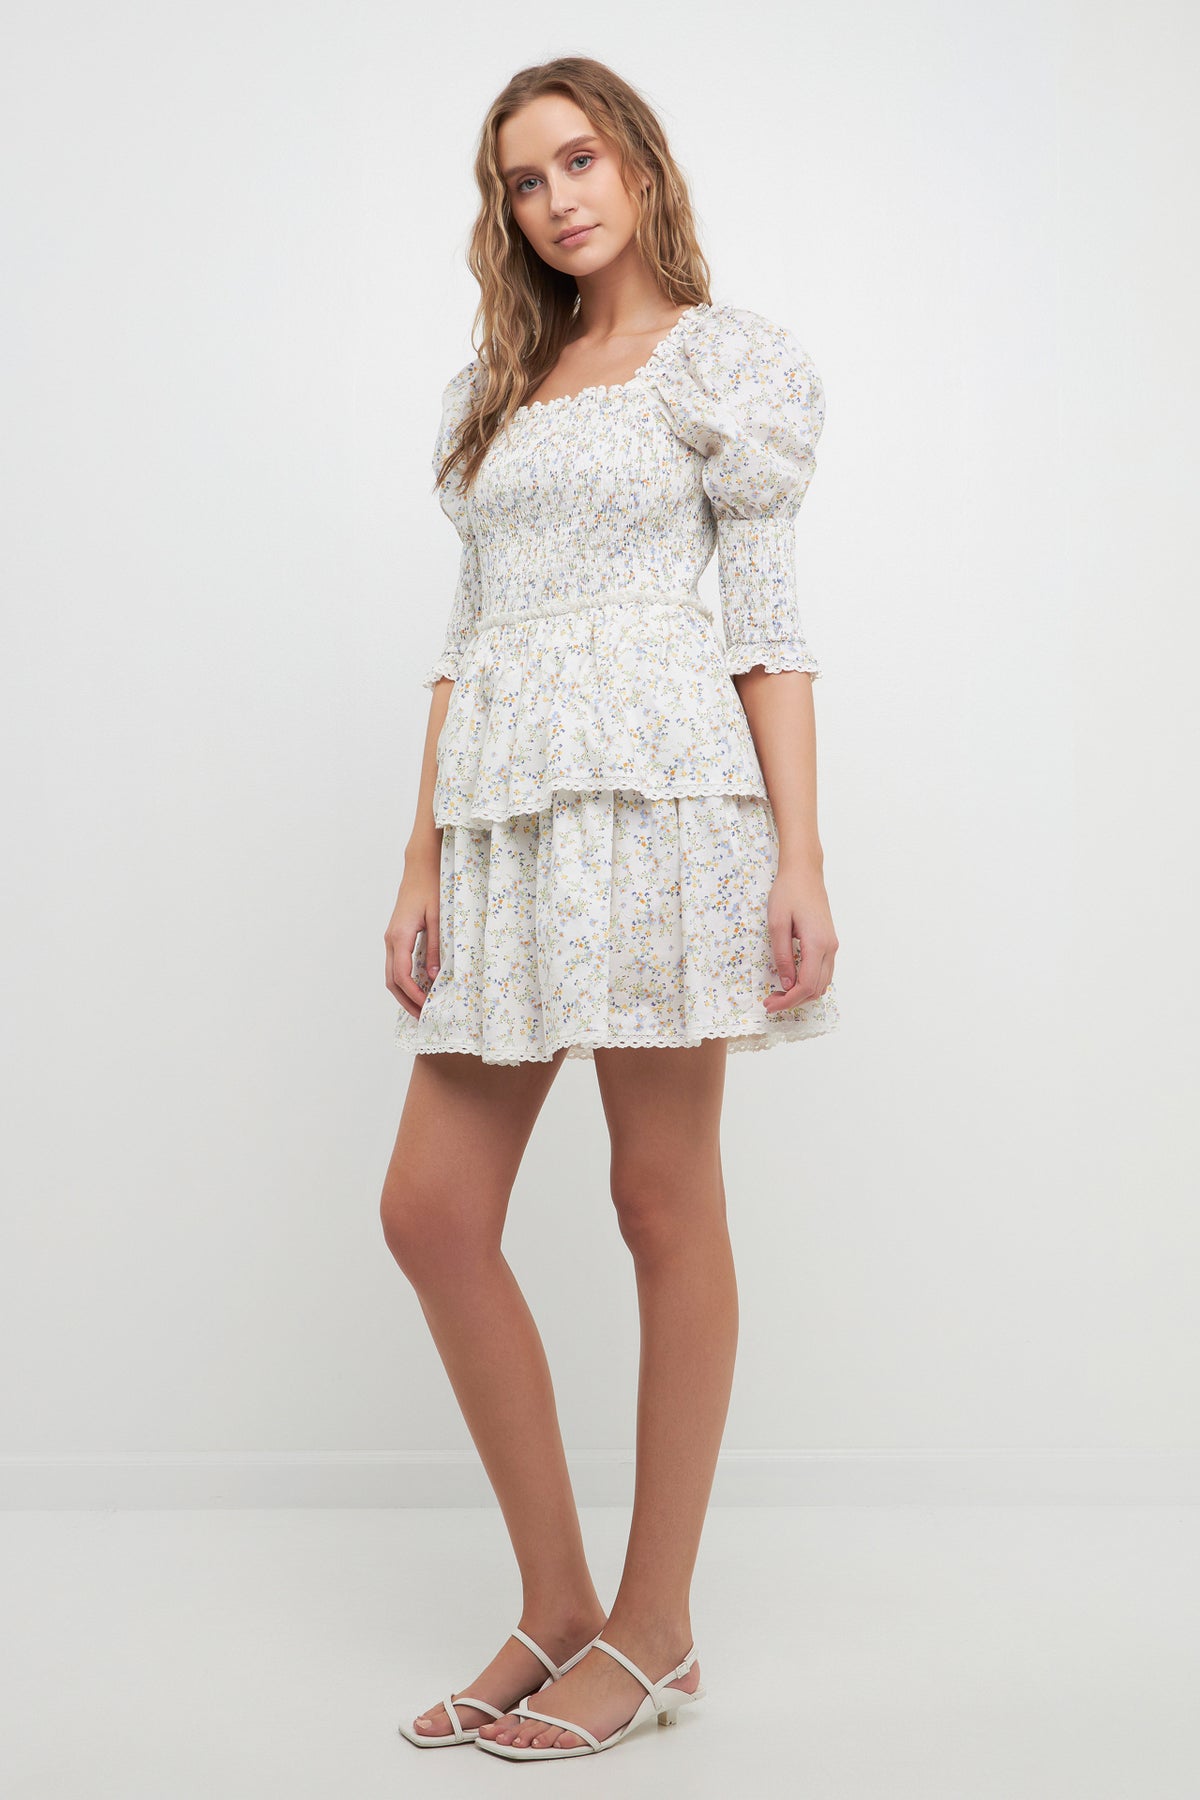 FREE THE ROSES - Lace Trim Floral Print Smocked Sleeve Mini Dress - DRESSES available at Objectrare